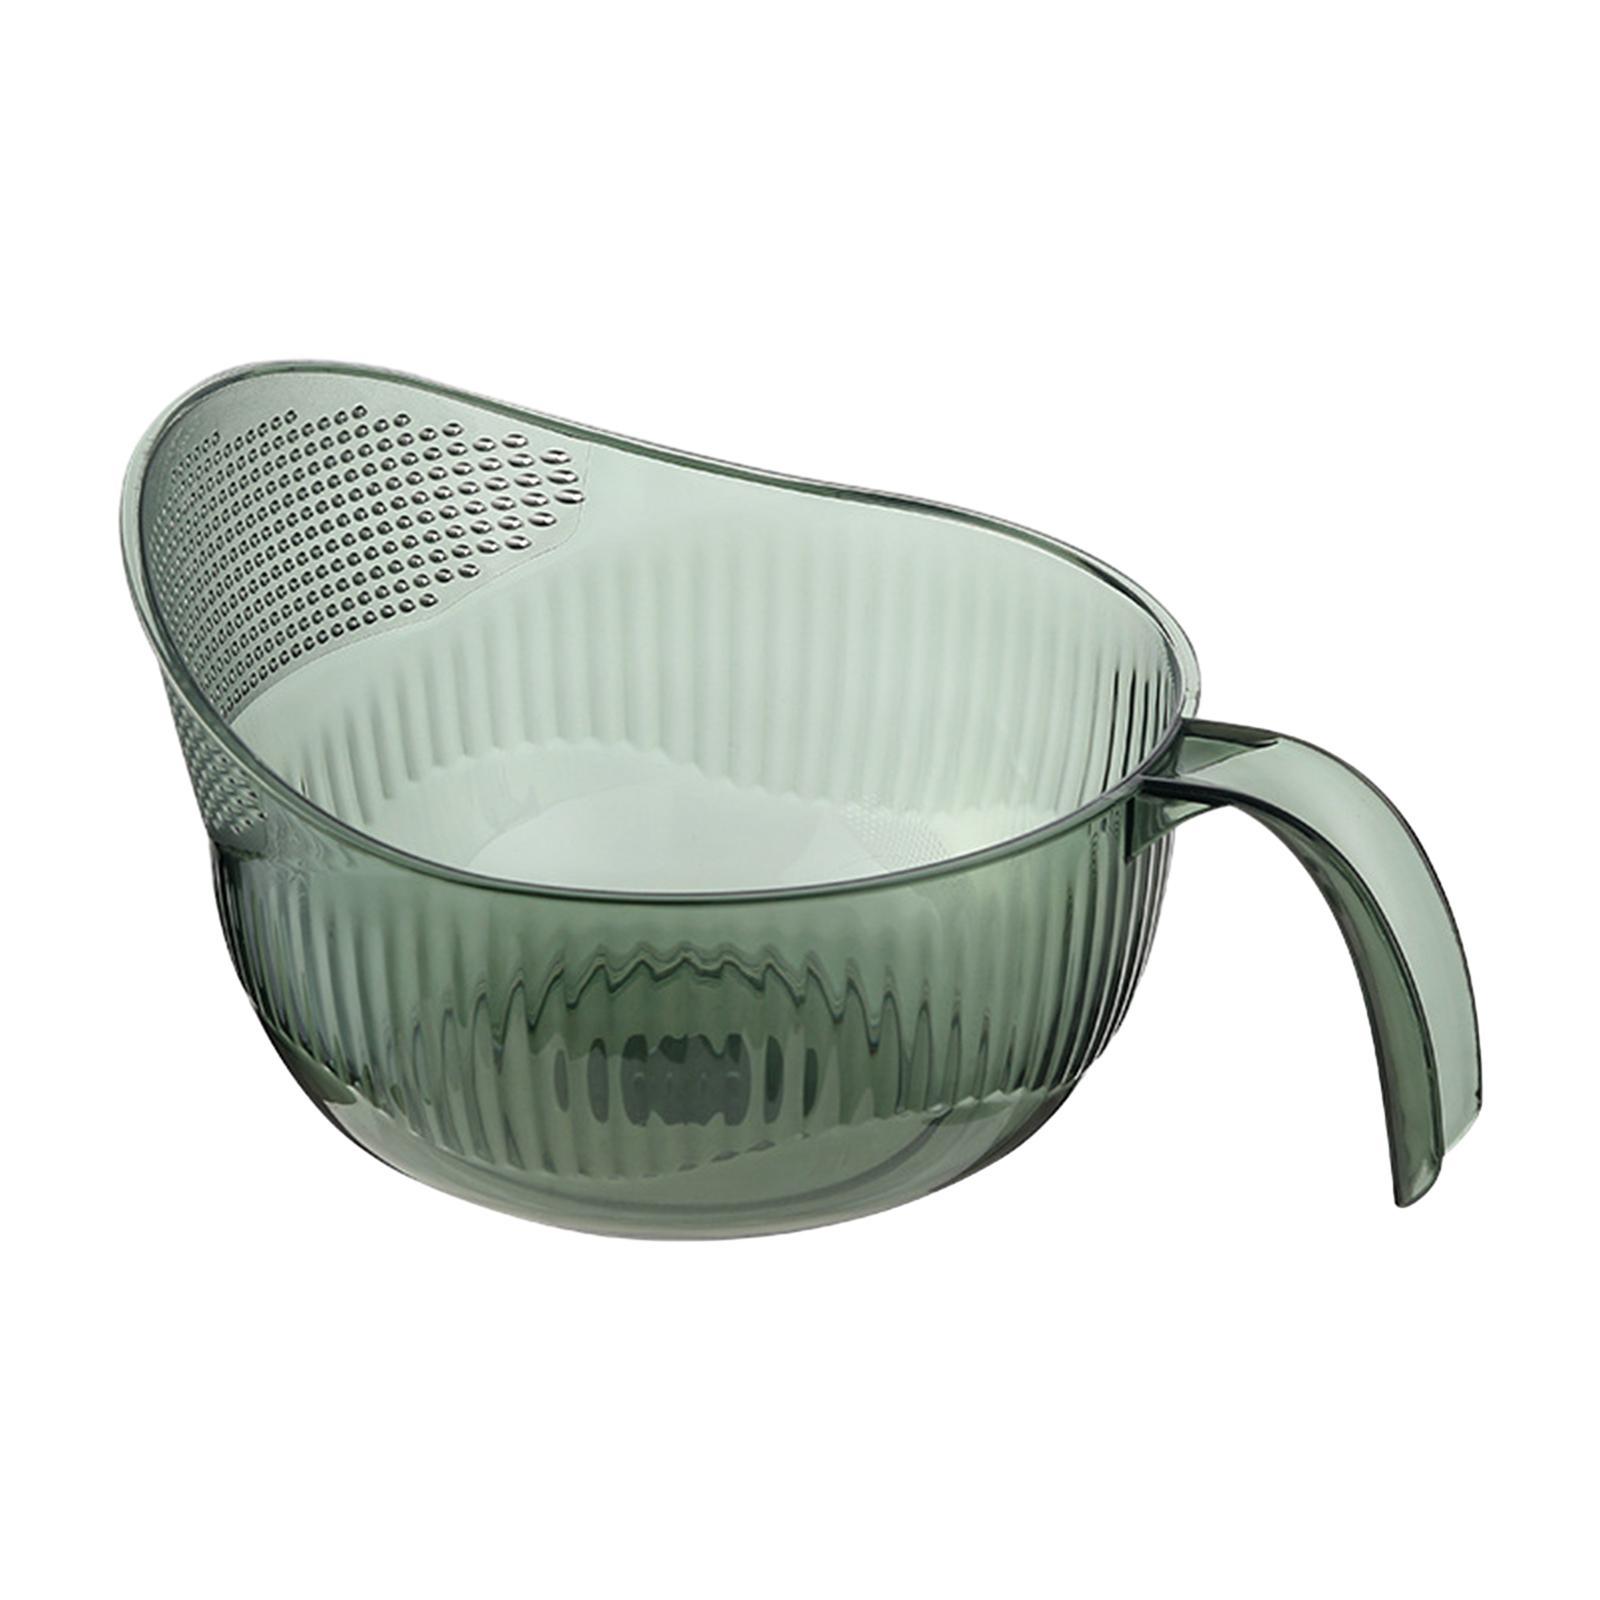 Washing Colander with Handle Rice Washing Strainer for Grain Spinach Carrots